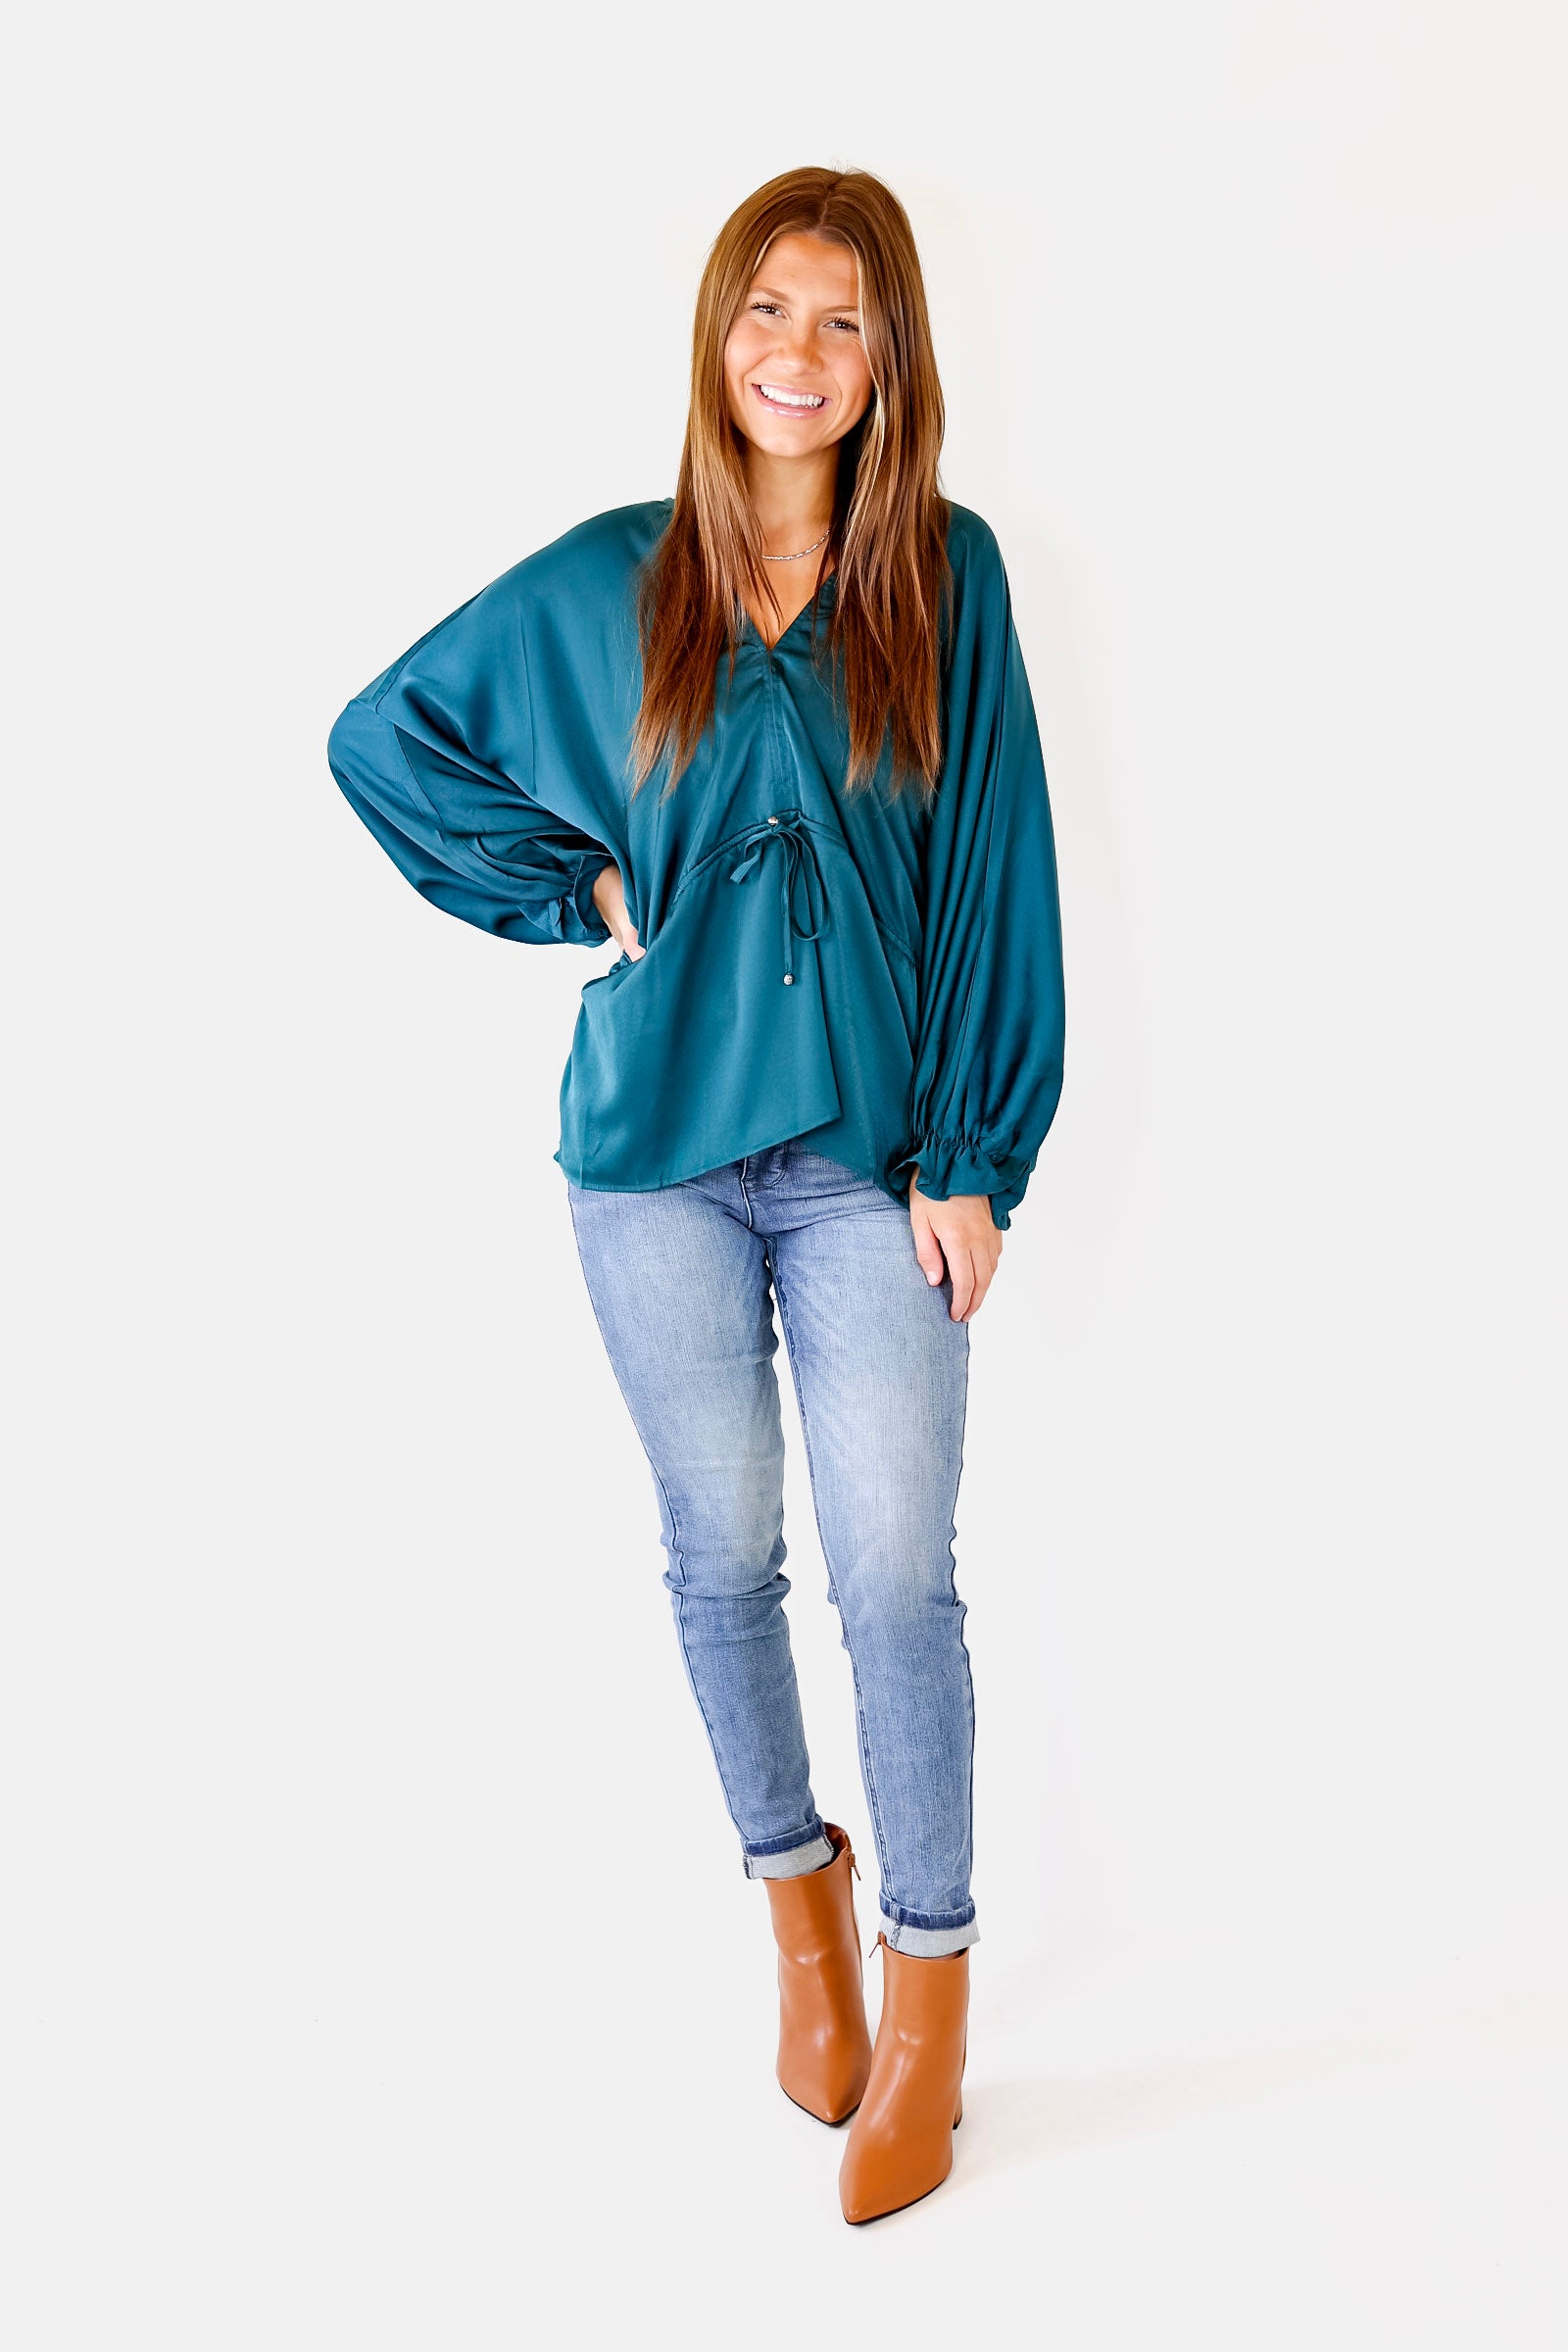 Stating Facts Satin Top with Drawstring Waist in Teal - Giddy Up Glamour Boutique